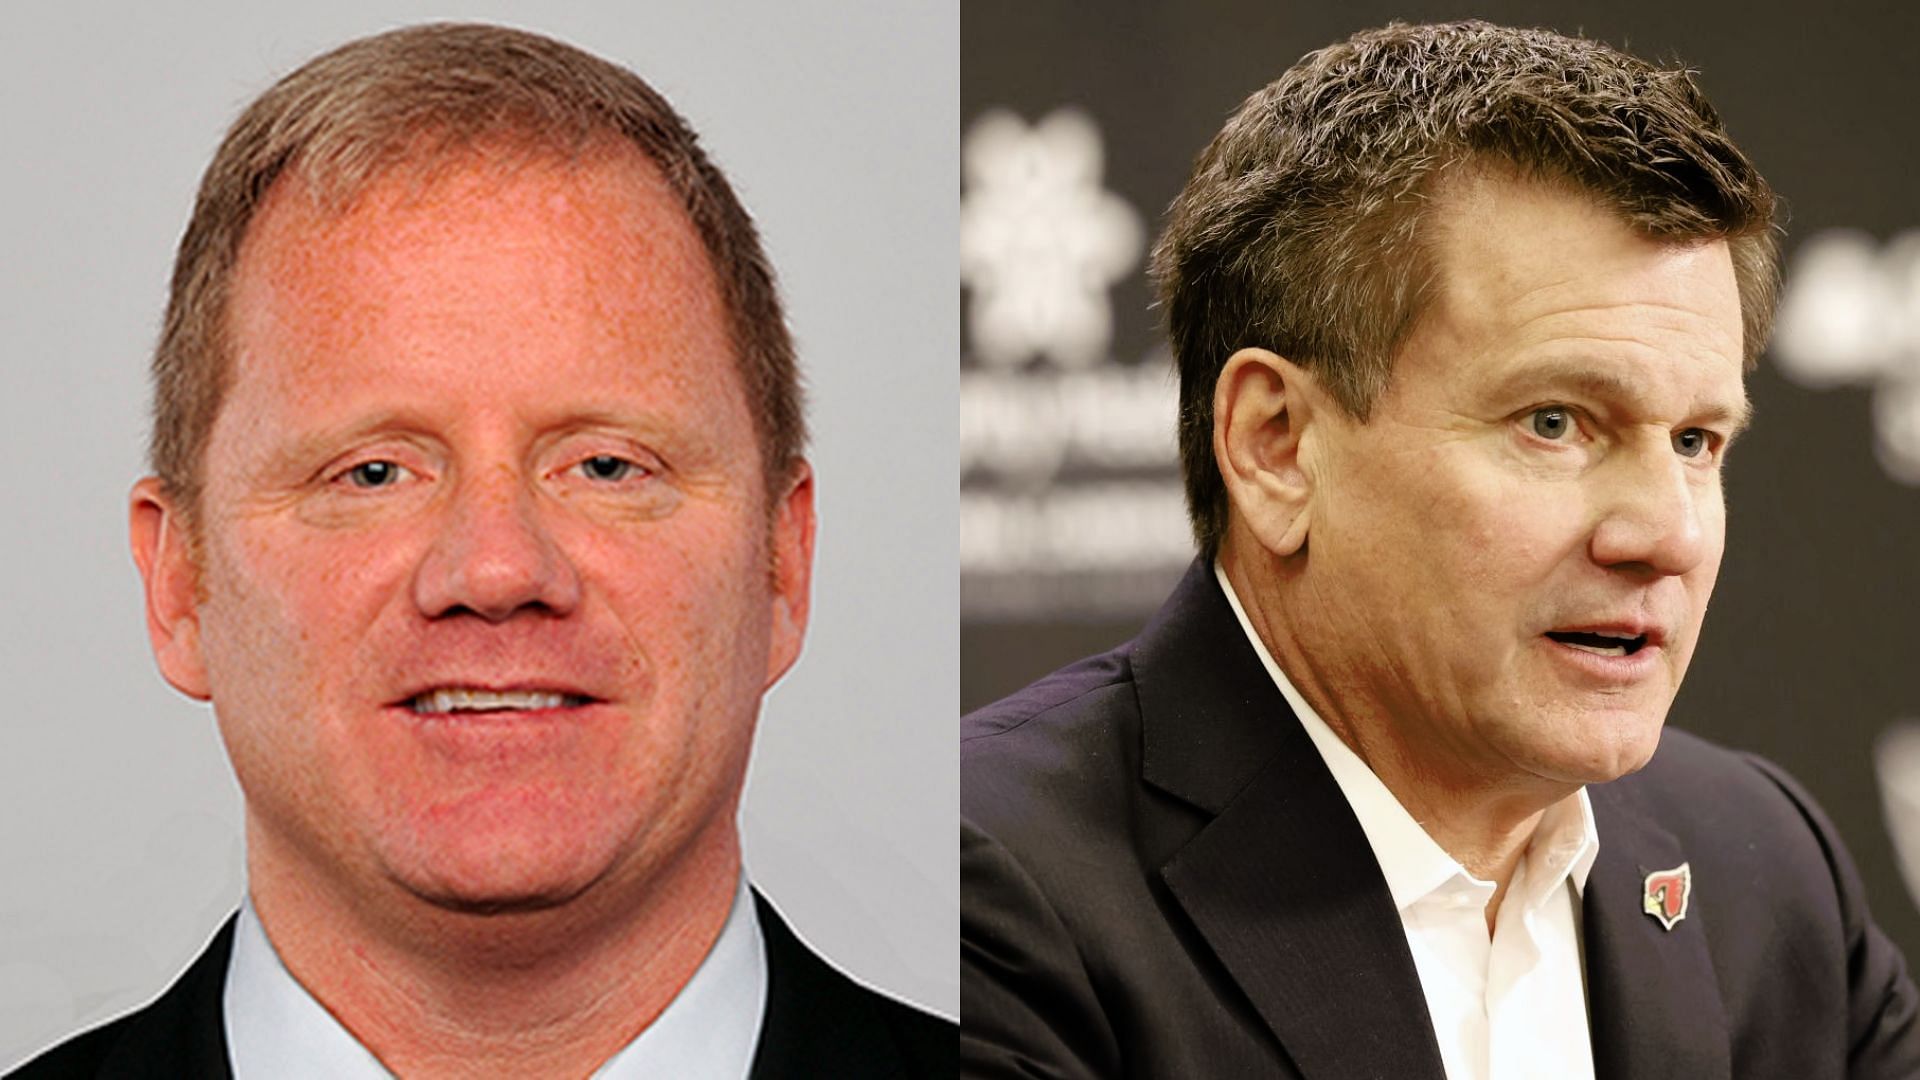 Former Arizona Cardinals Vice President of Player Development Terry McDonough accuses team owner Michael Bidwill (right) of defamation. (Image credit: NinersNation.com)